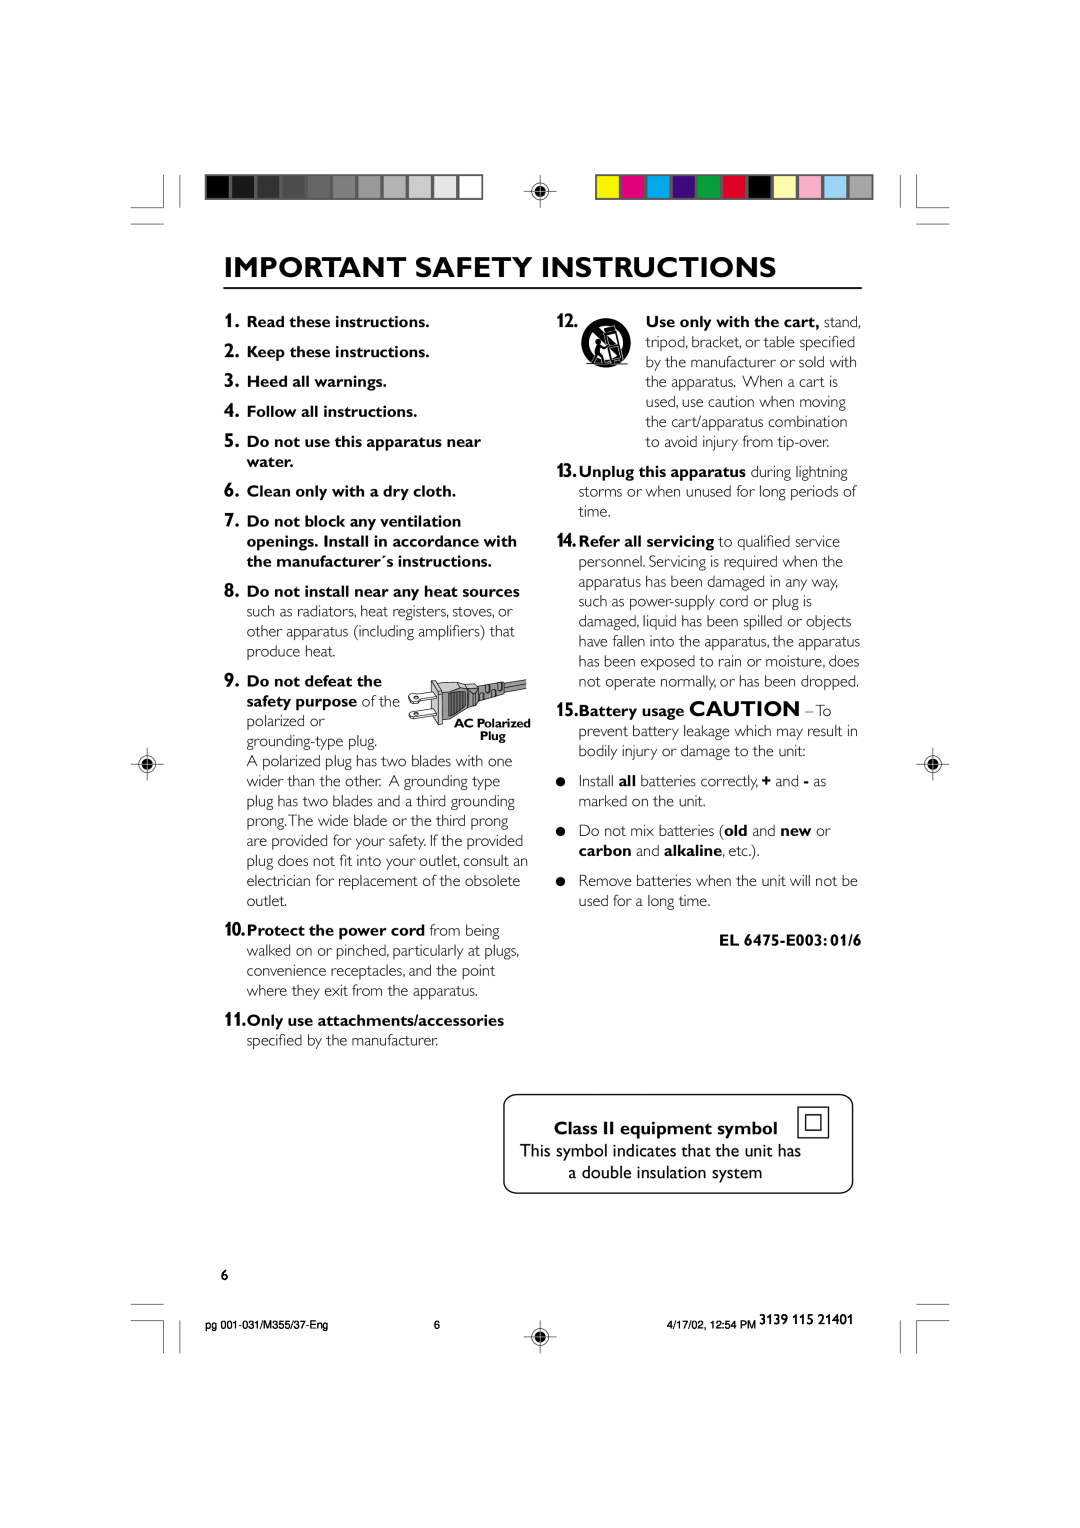 Philips M355 warranty Class II equipment symbol, Important Safety Instructions 